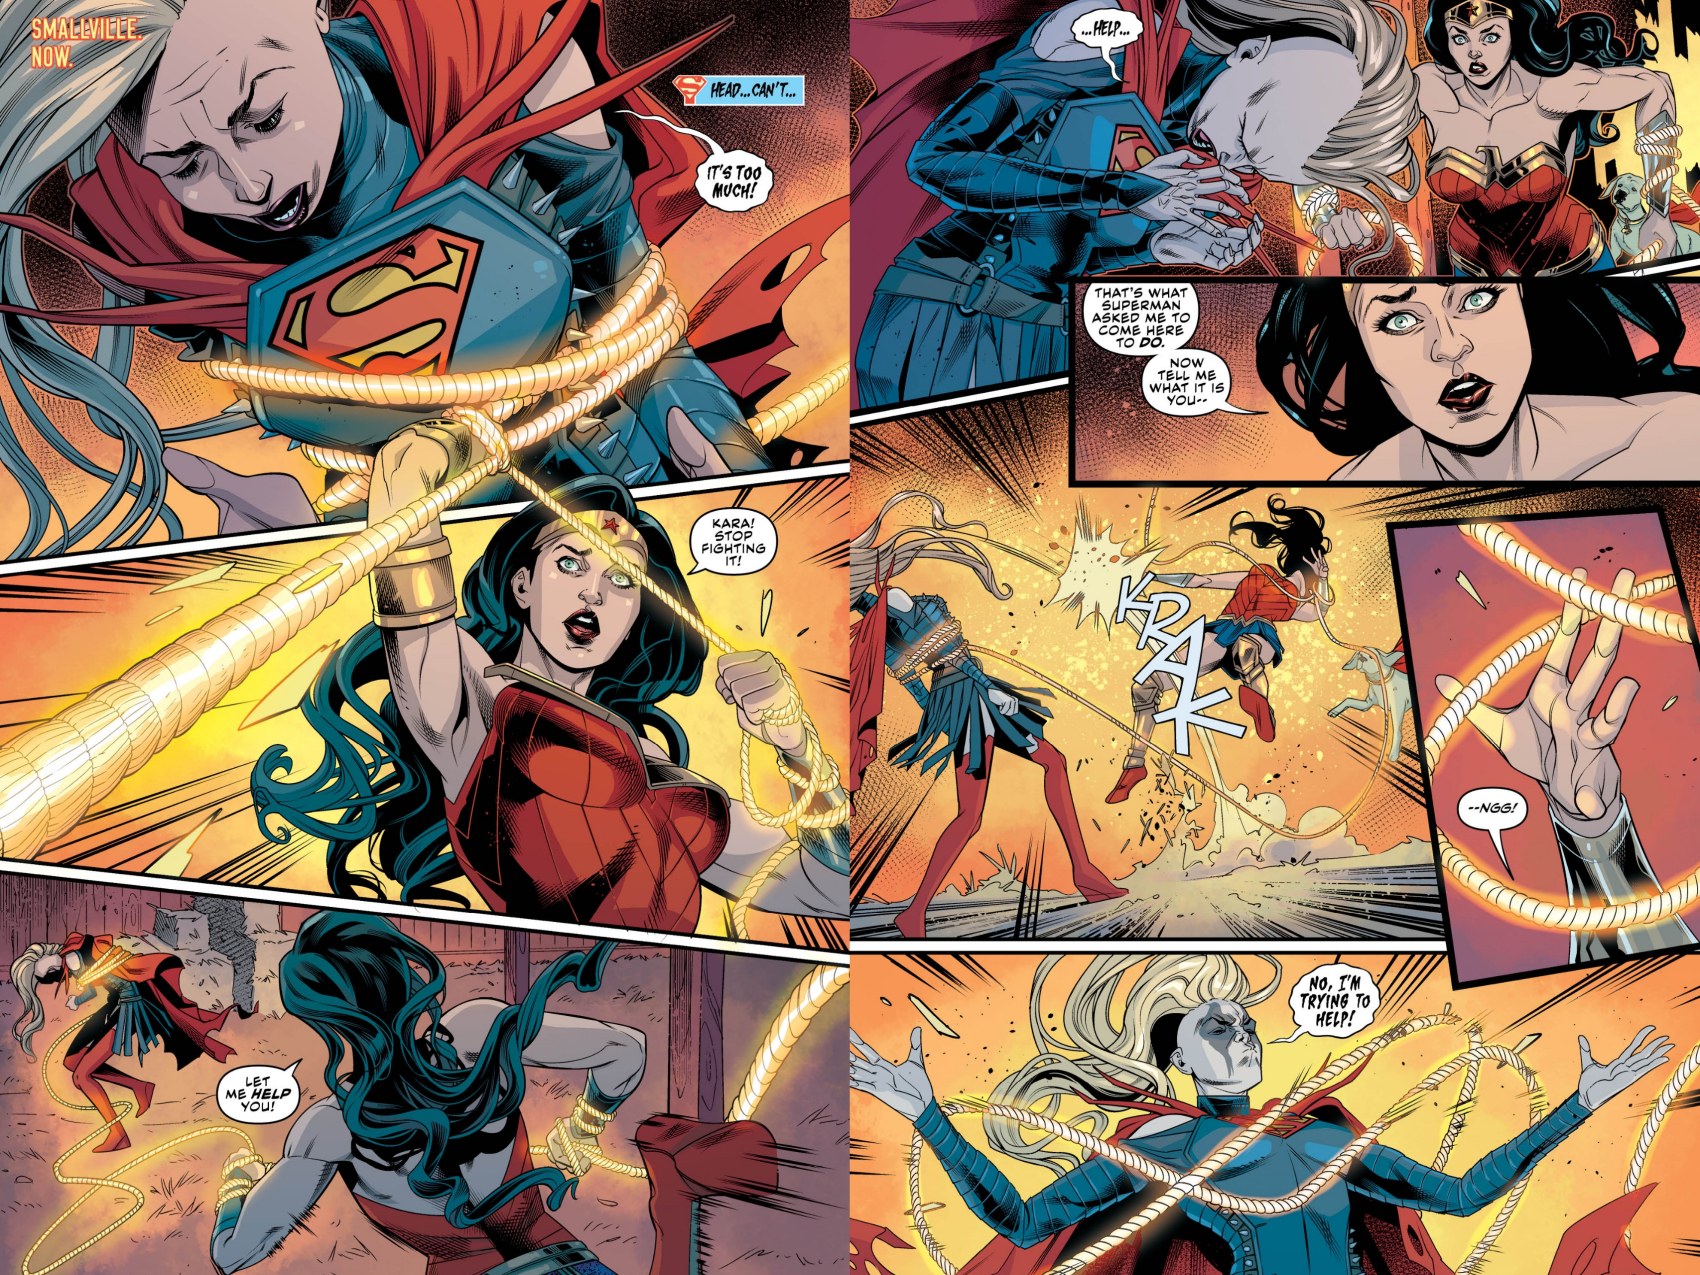 Supergirl Comic Box Commentary: Review: Superman #39